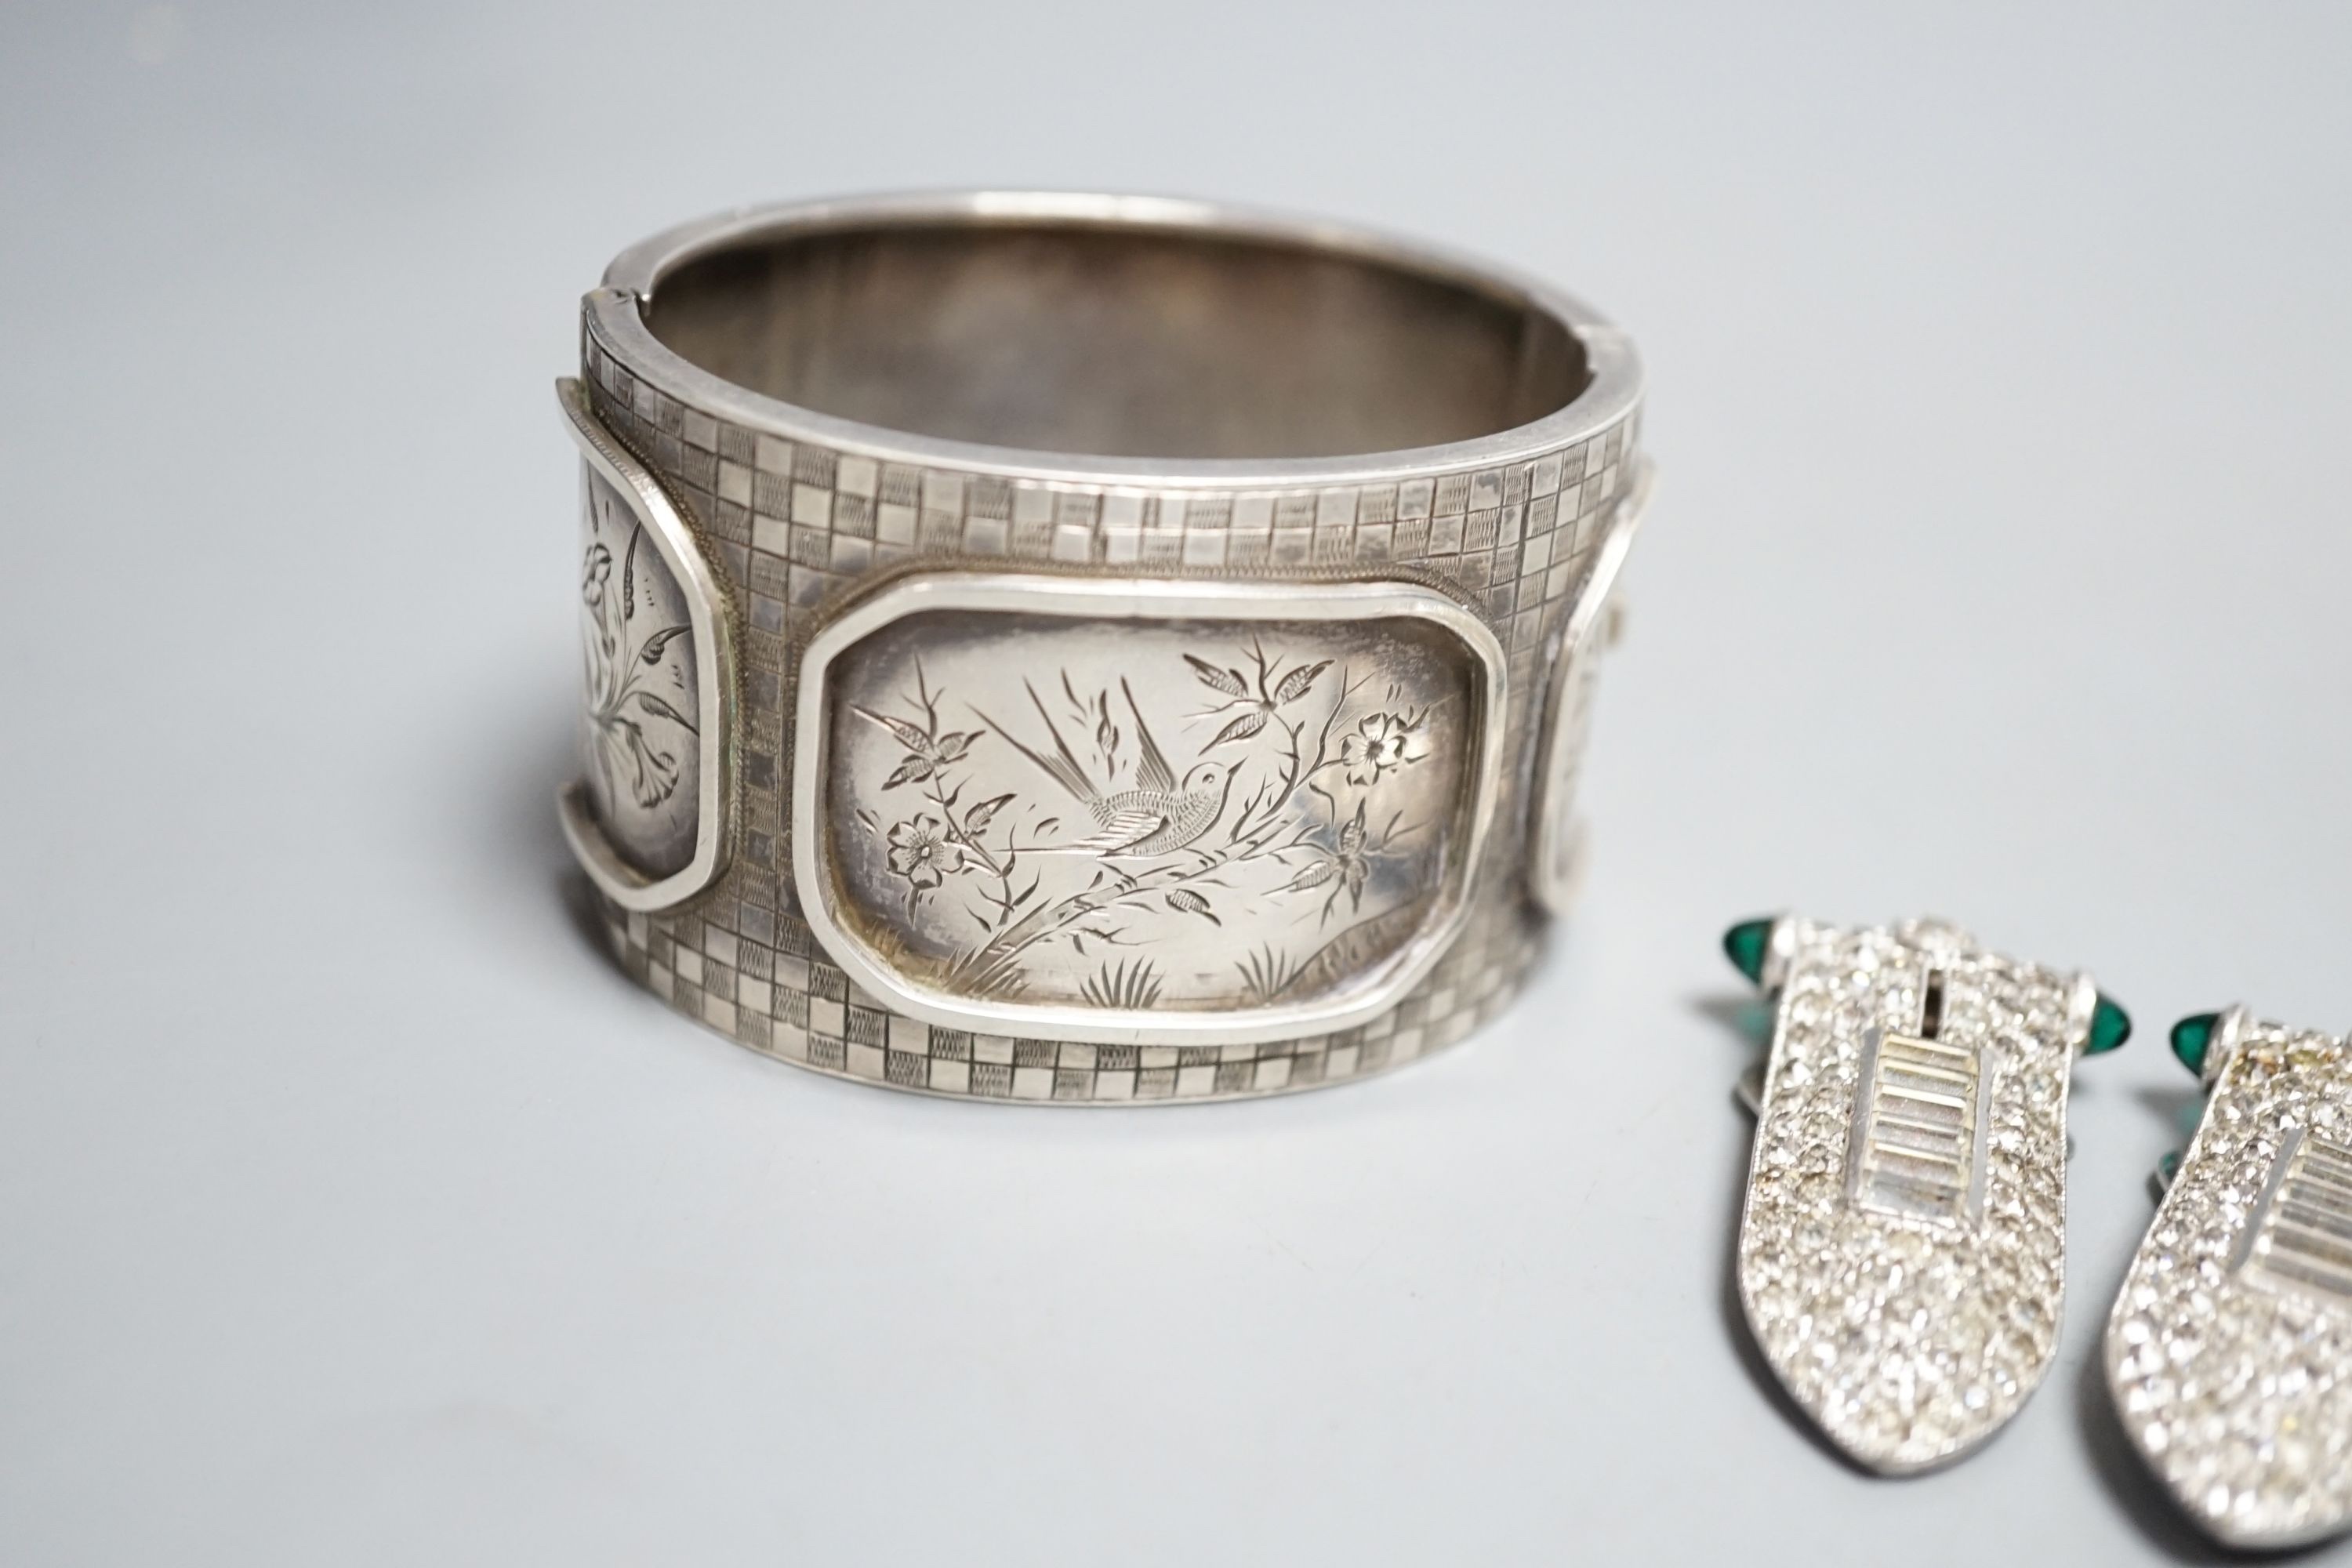 A pair of art deco paste clip earrings and a sterling bangle.